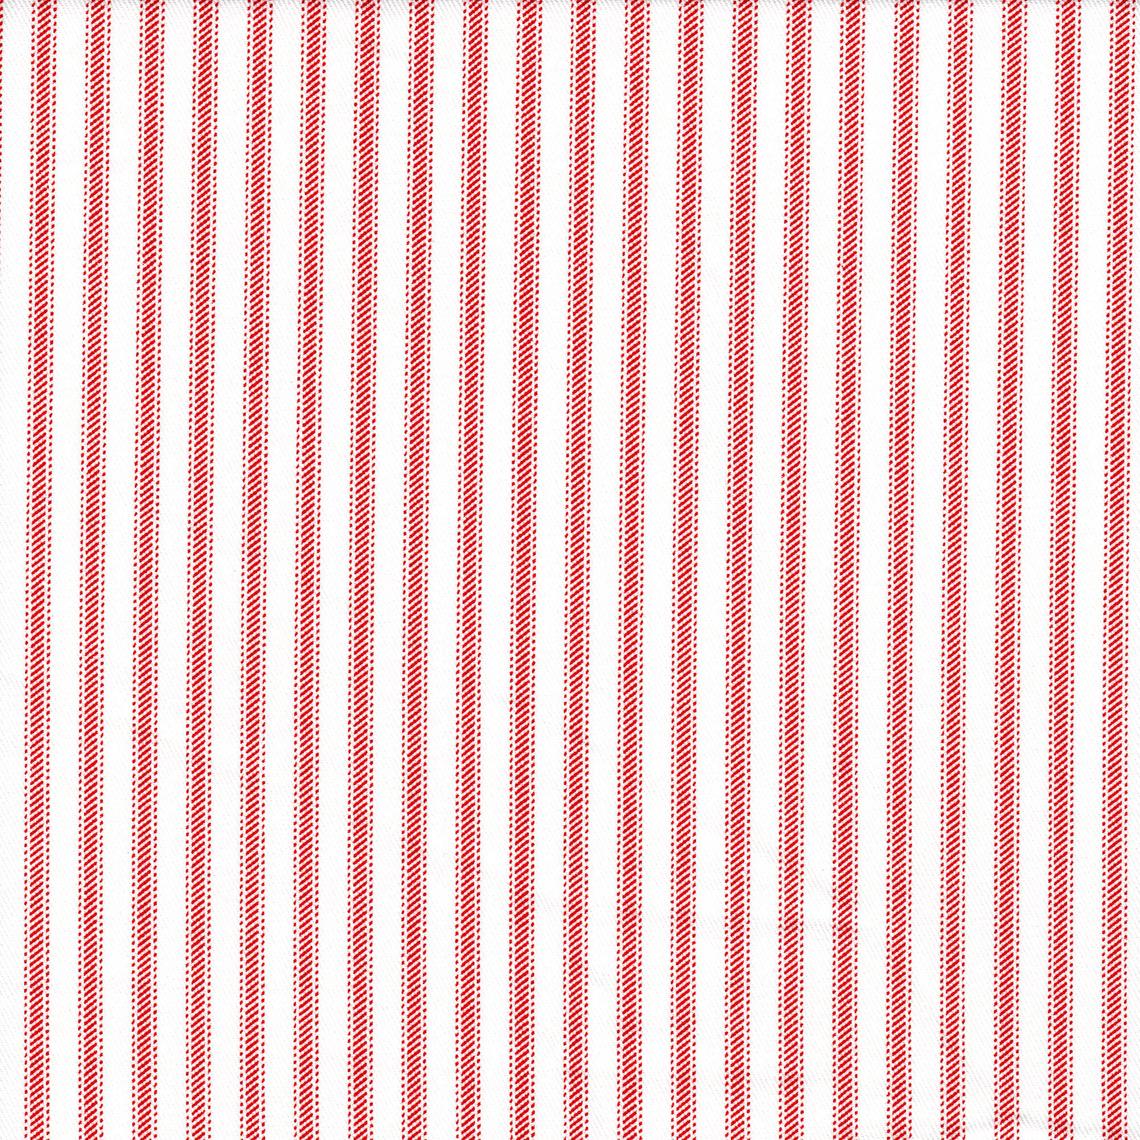 tailored valance in classic lipstick red ticking stripe on white